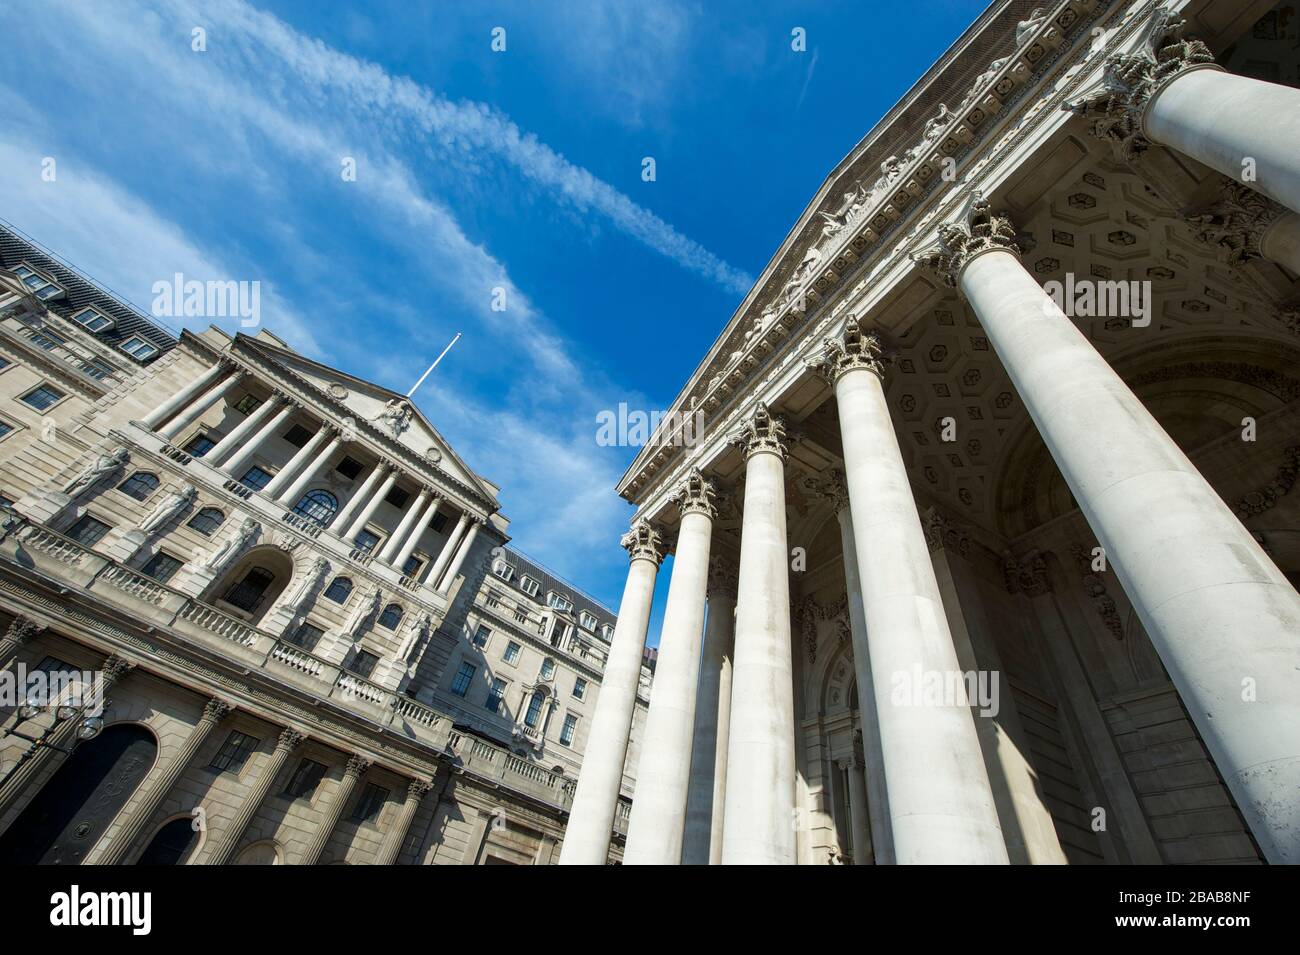 Sunny view of the facade of the Bank of England building and historic Royal Exchange under bright blue sky in The City financial center of London, UK Stock Photo